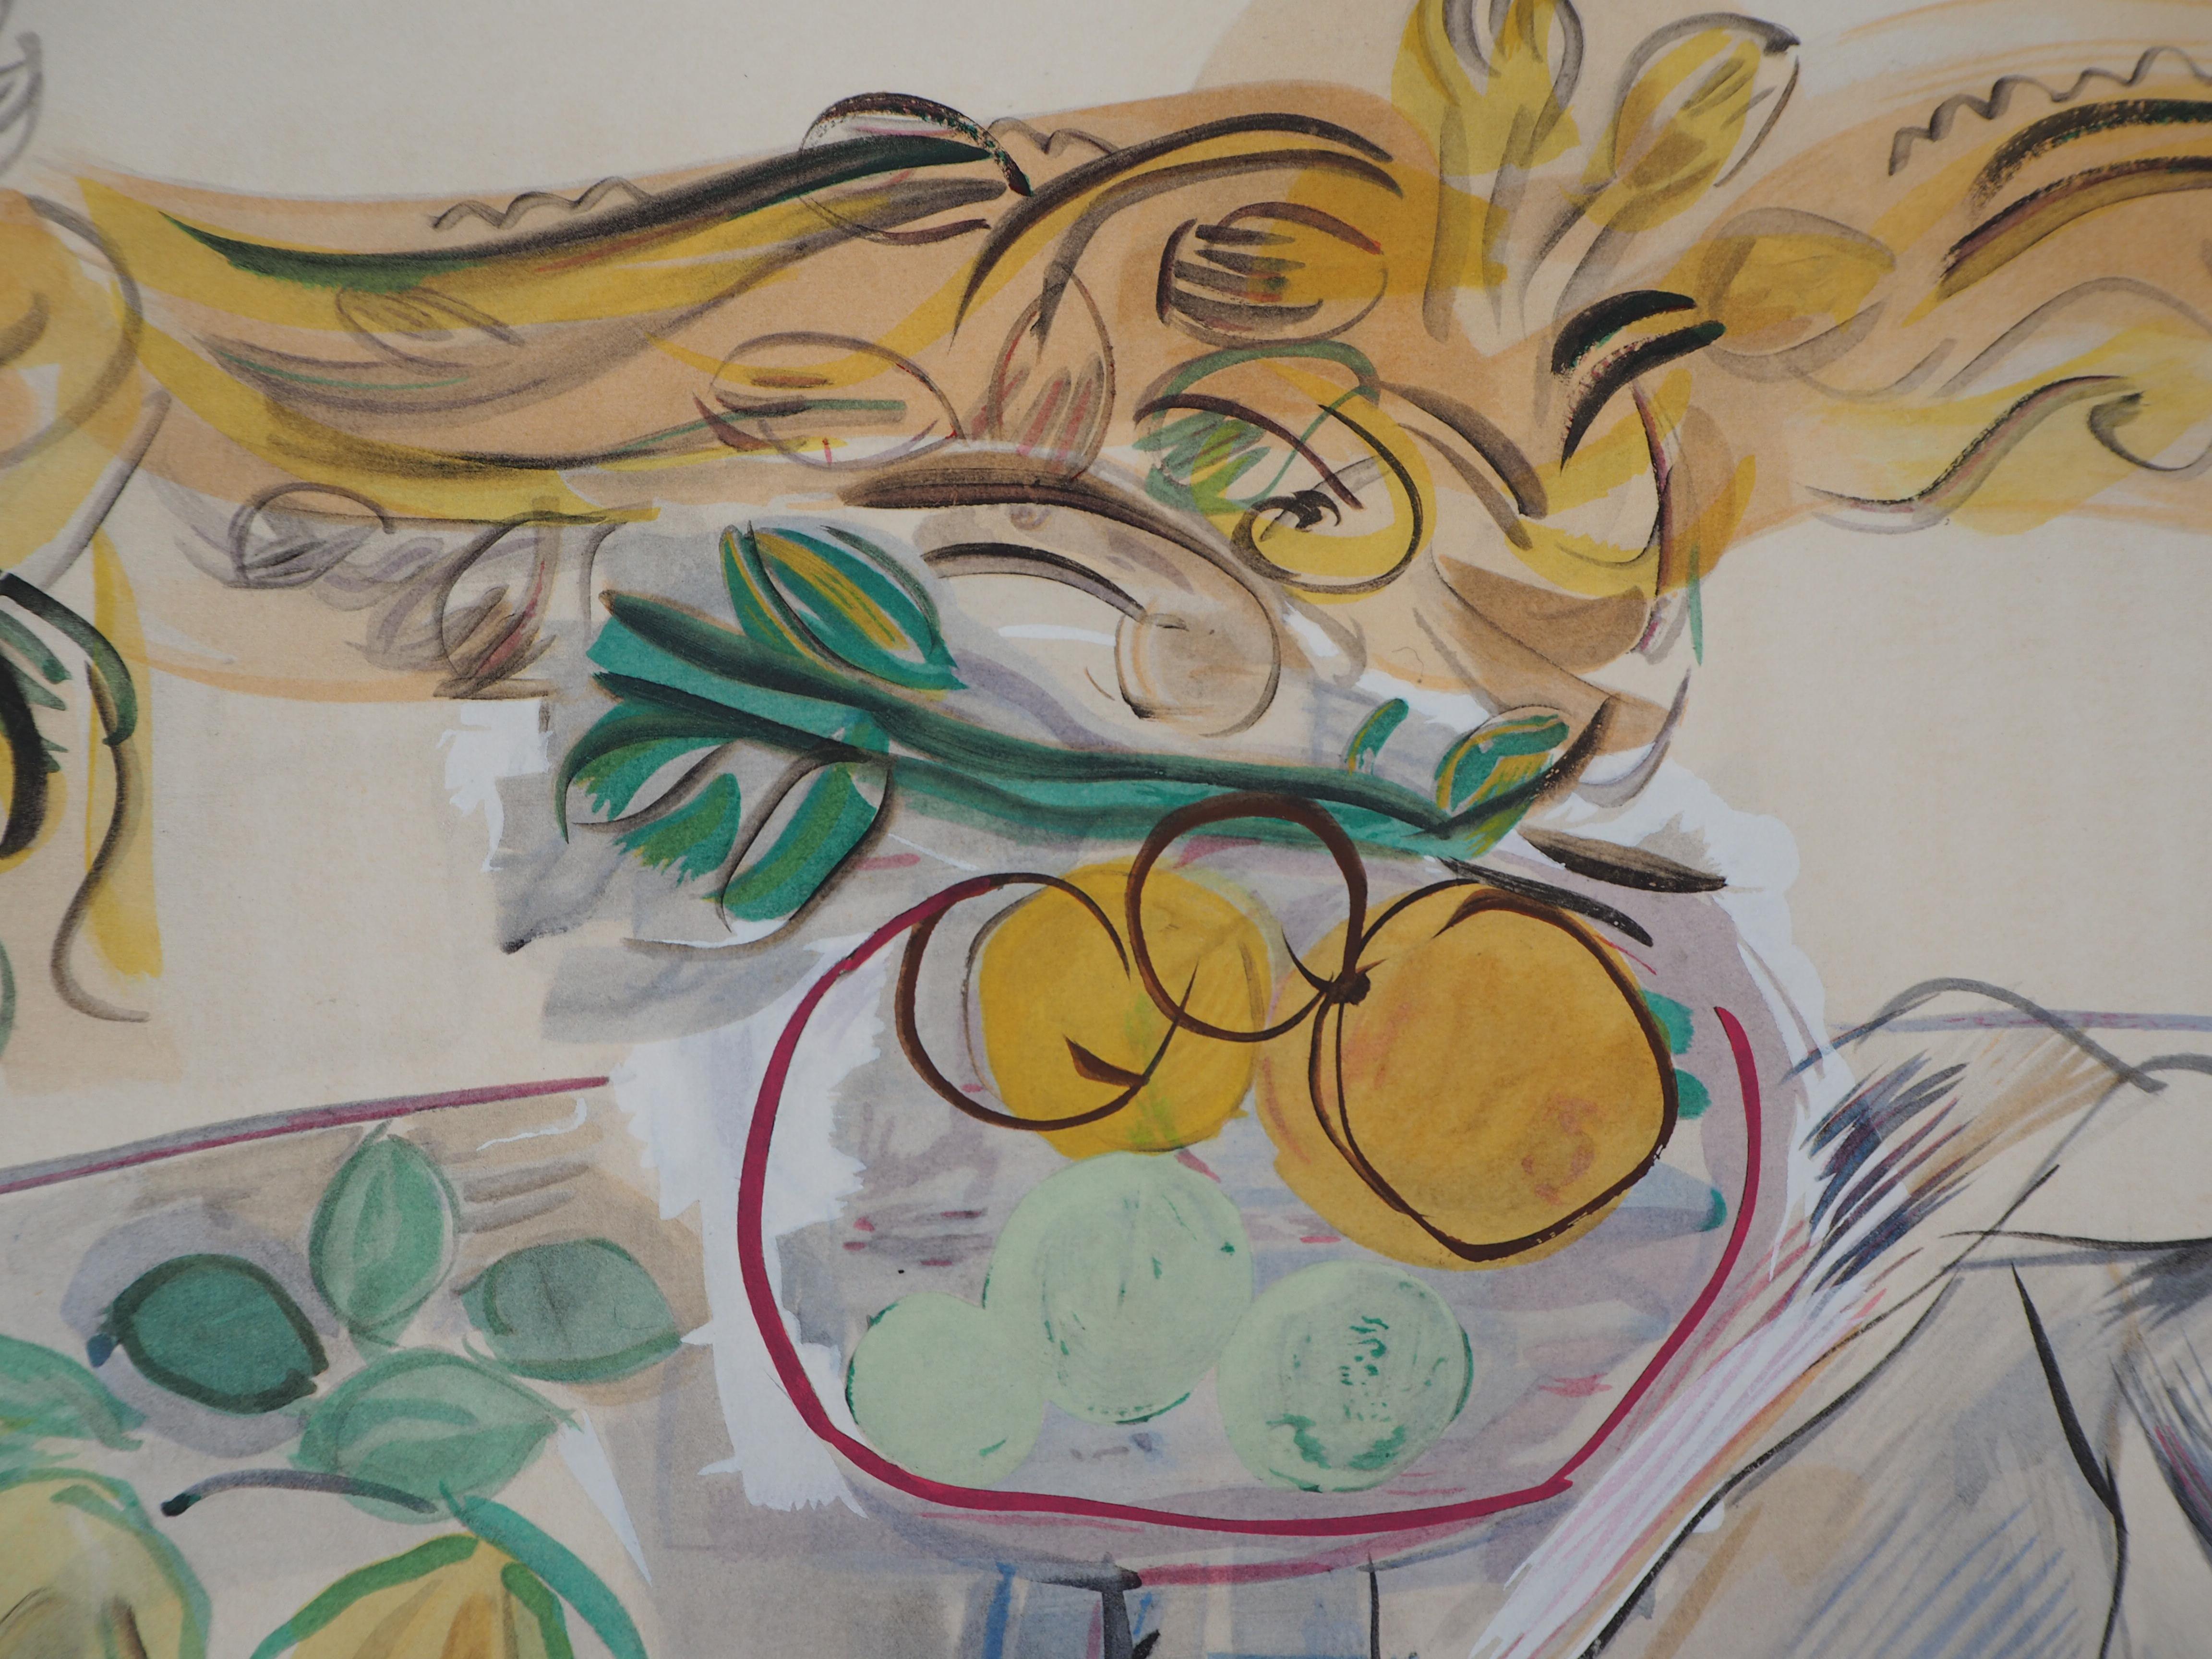 Still Life with Fruits - Original Lithograph - Gray Figurative Print by Raoul Dufy